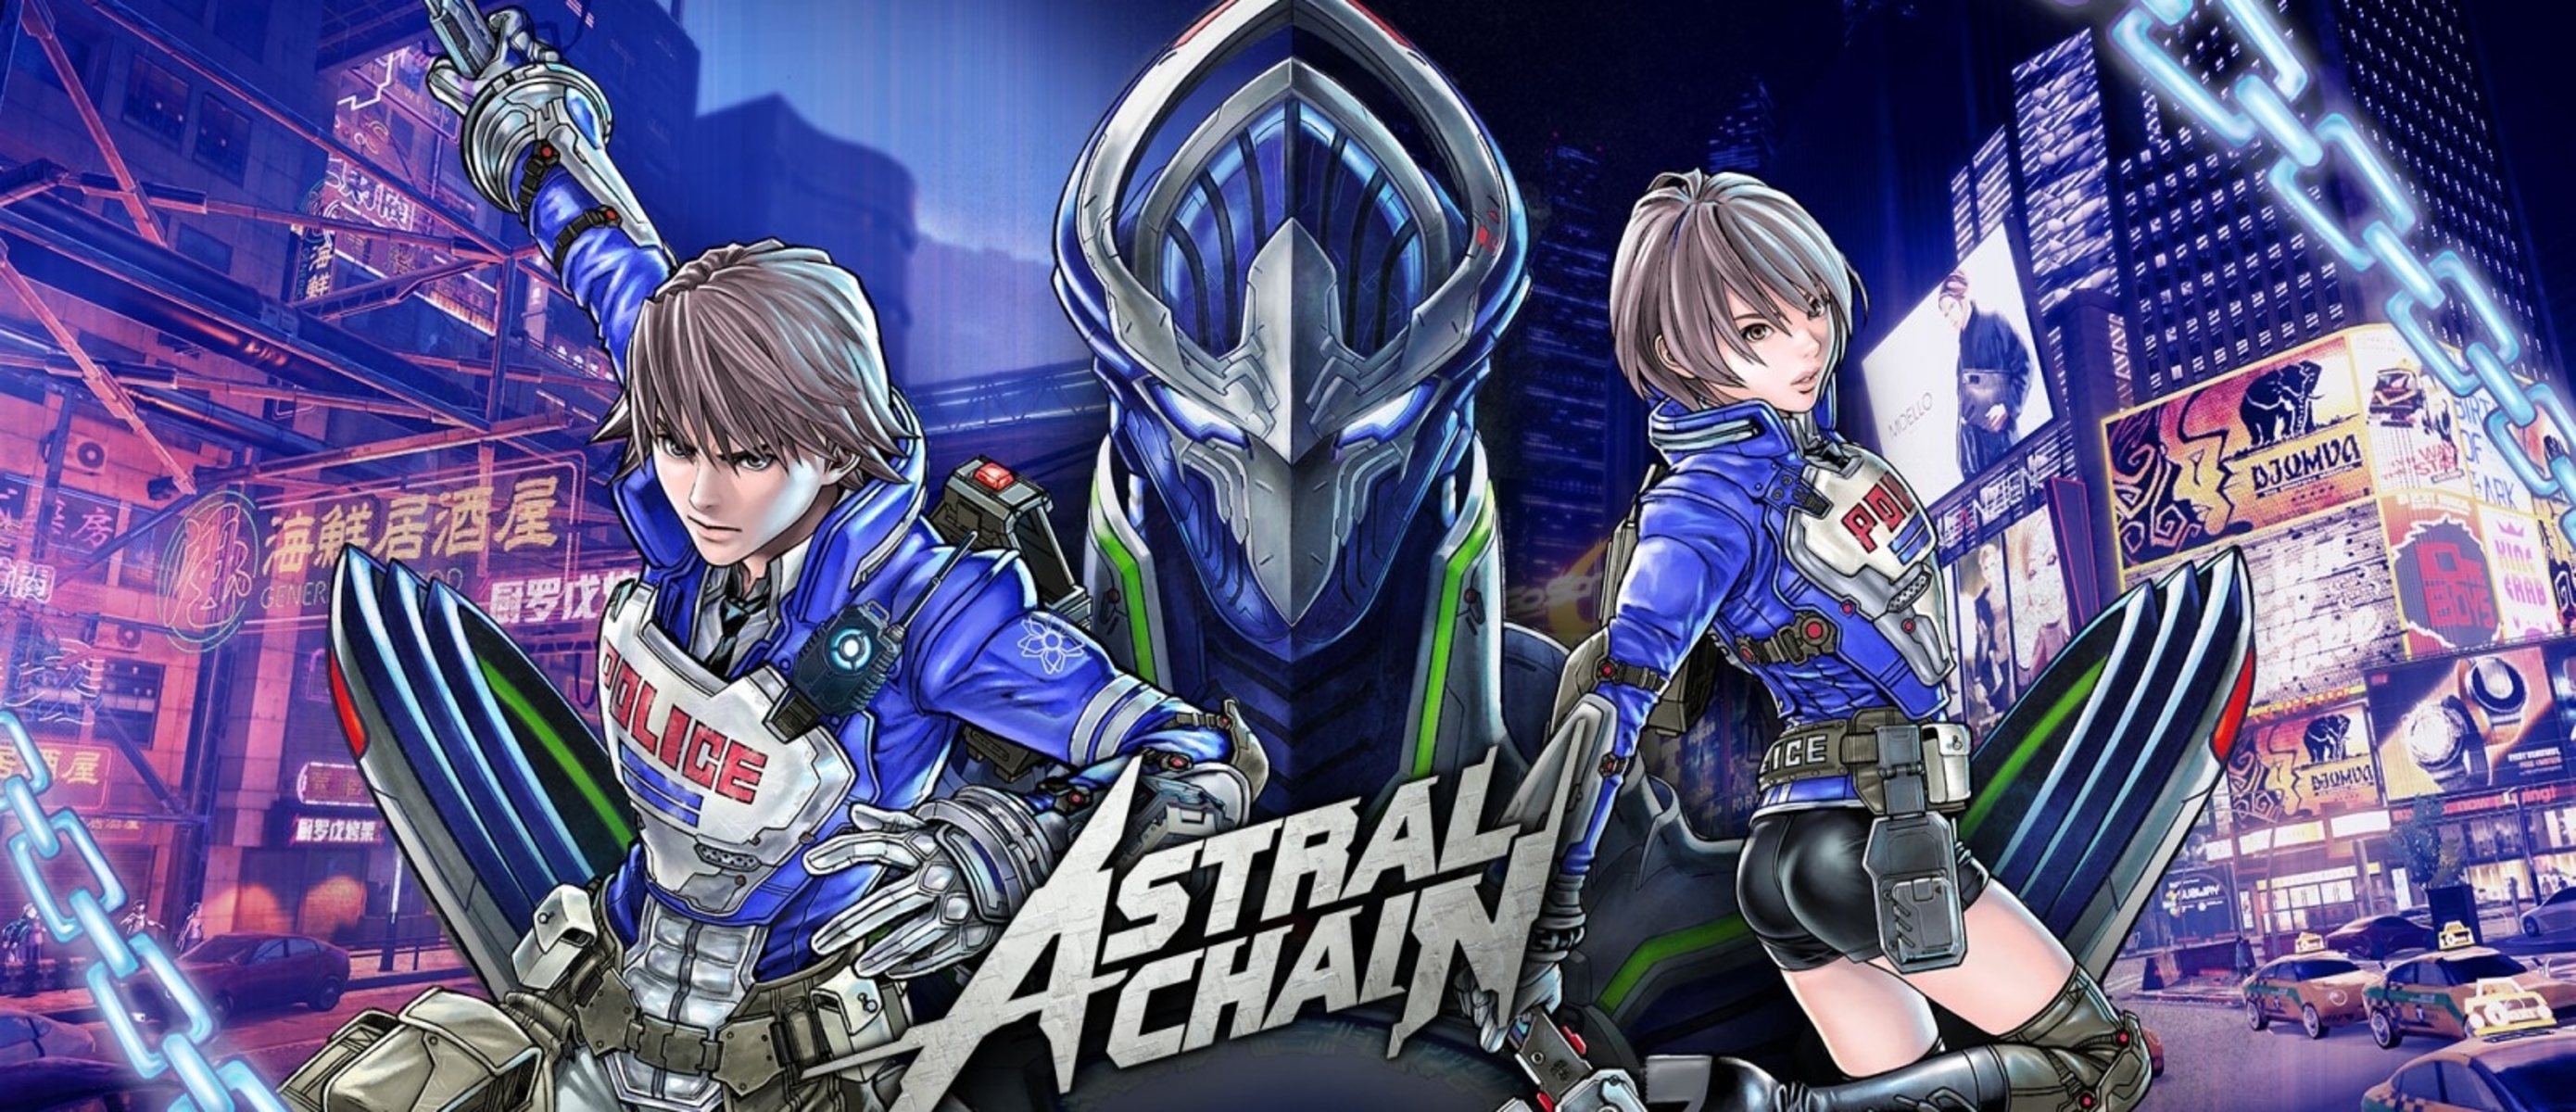 Astral Chain Nintendo Switch. Platinum games. Astral source. Ai Art.